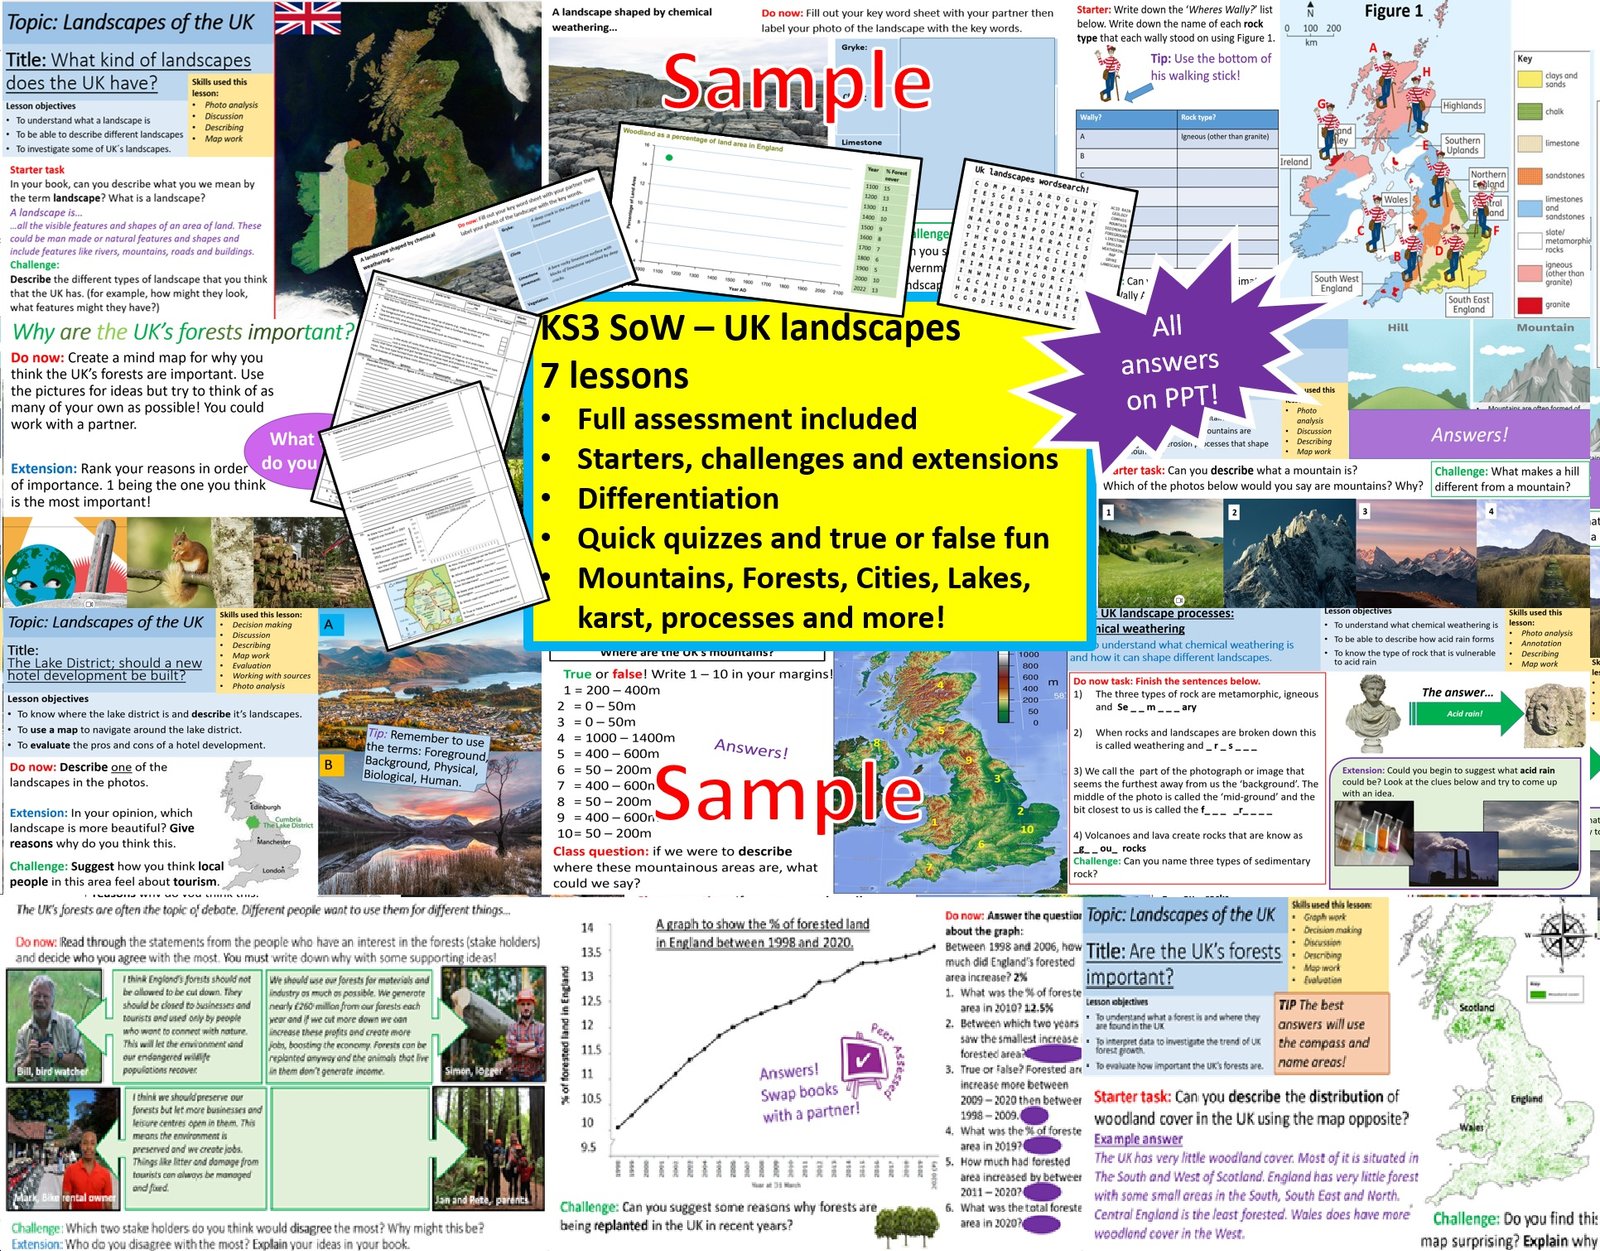 Collage of UK landscapes educational resource materials.